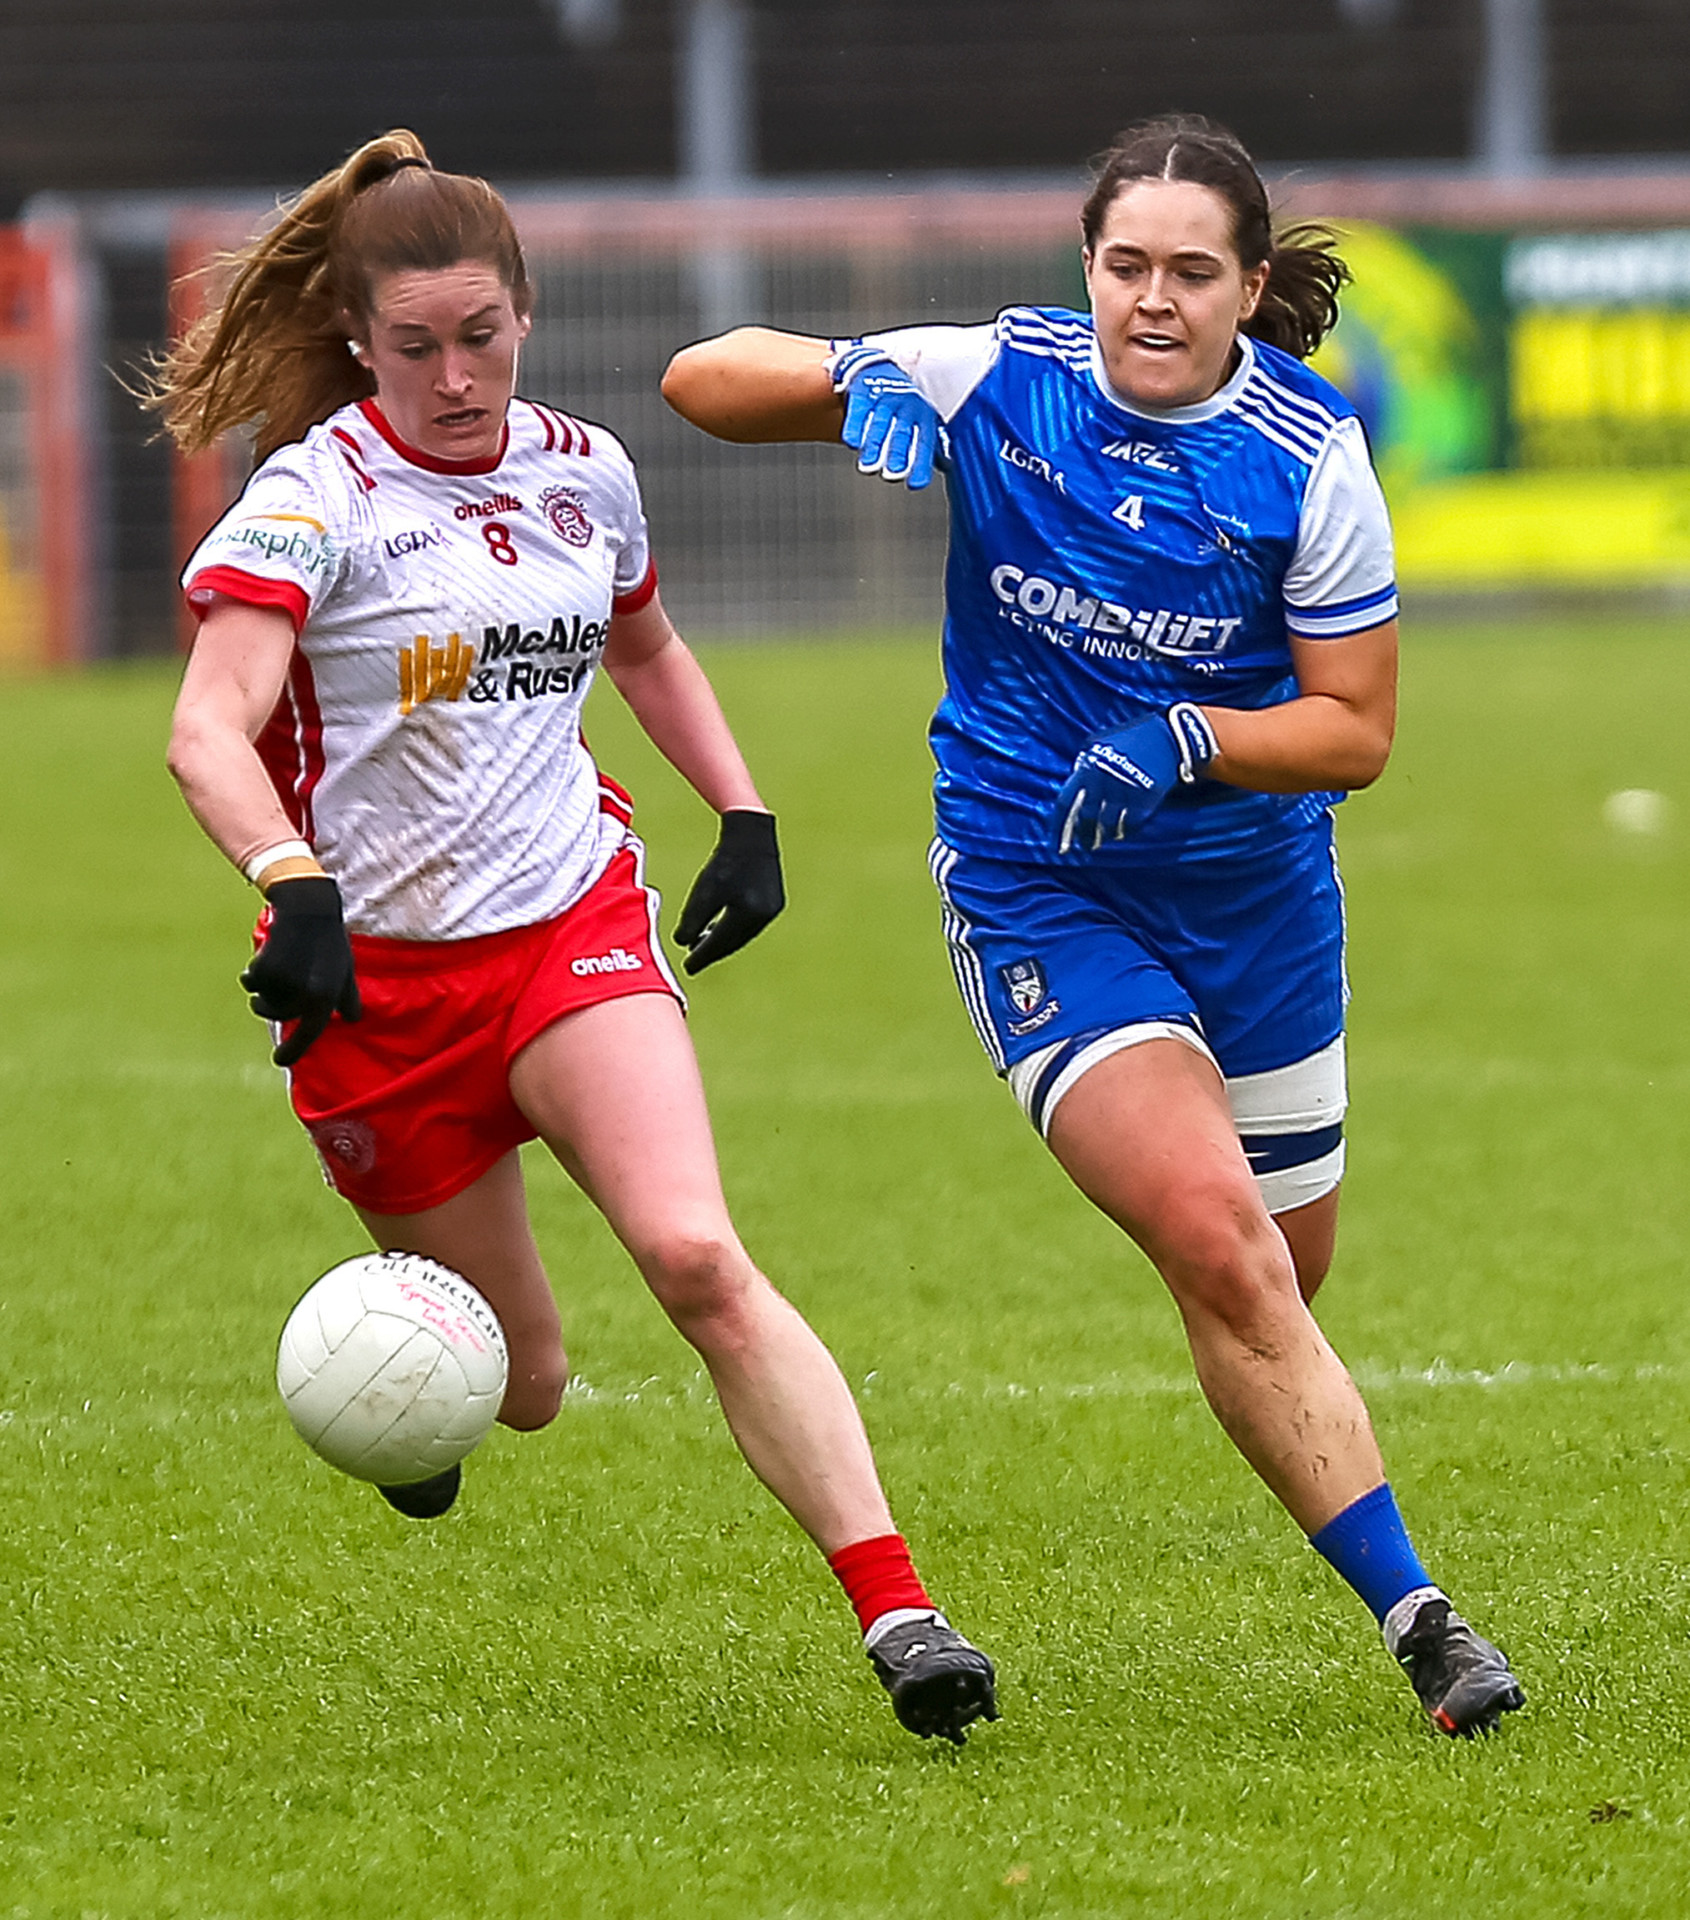 Two Saffron showdowns on the cards for Tyrone Ladies